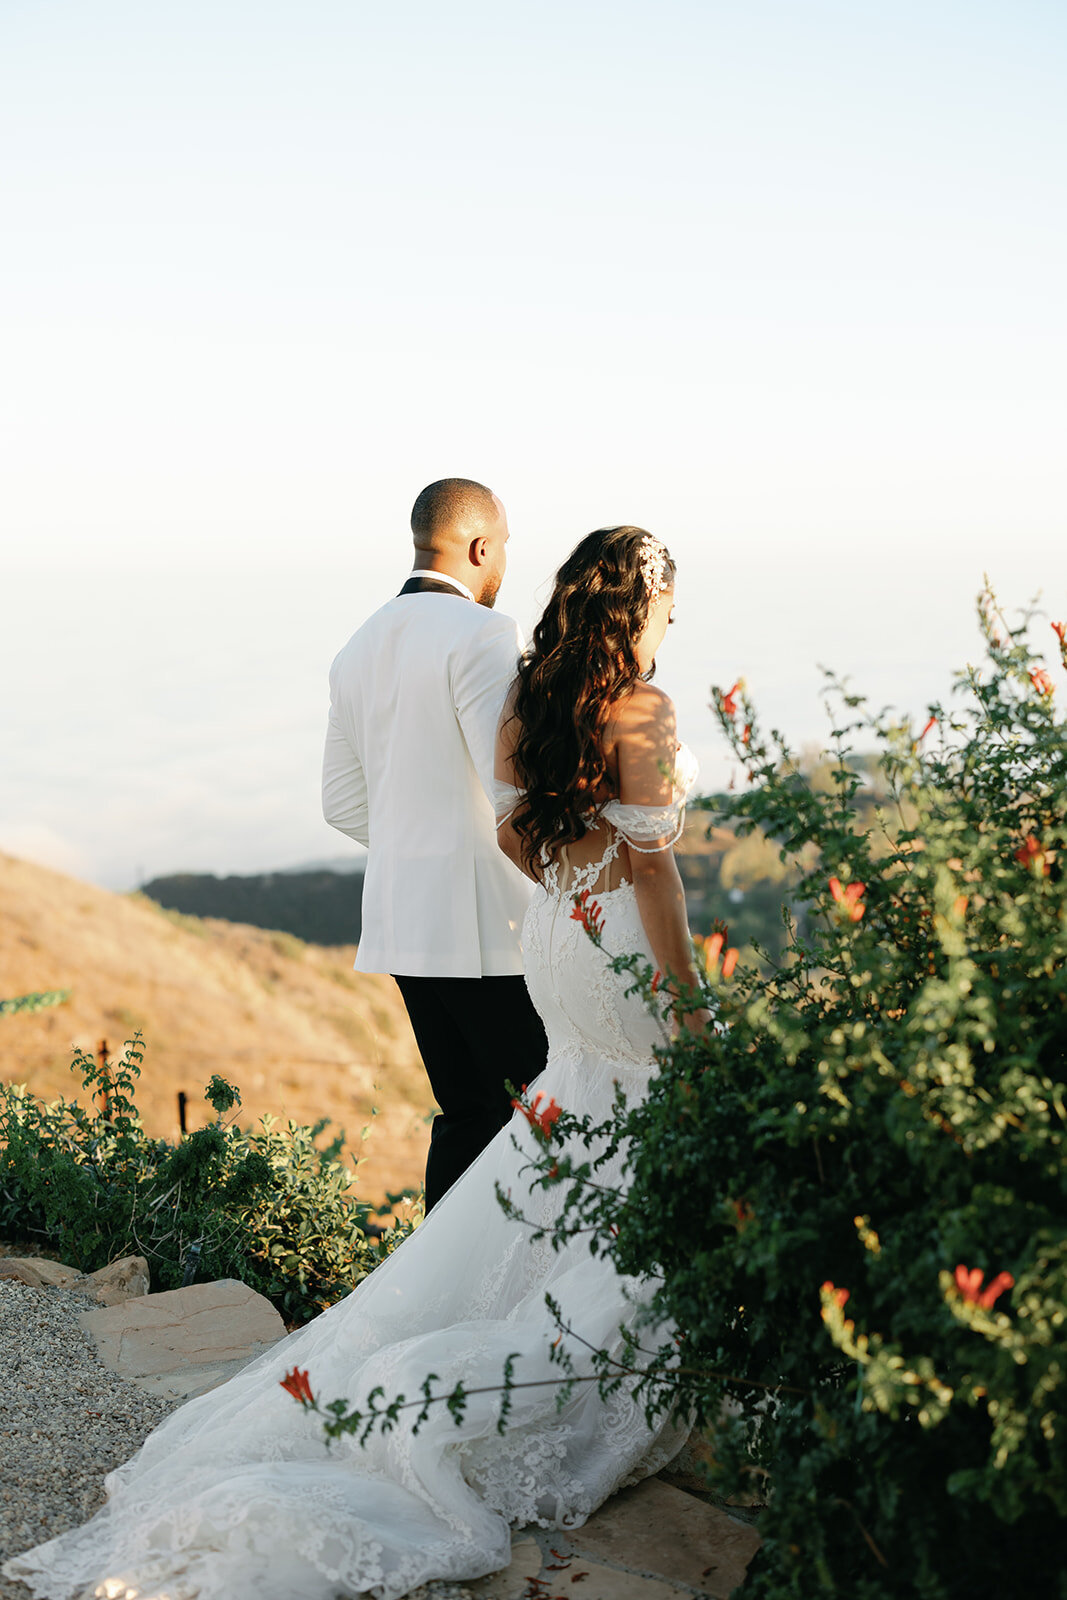 safia + ryan - The Authentic Storytellers-82